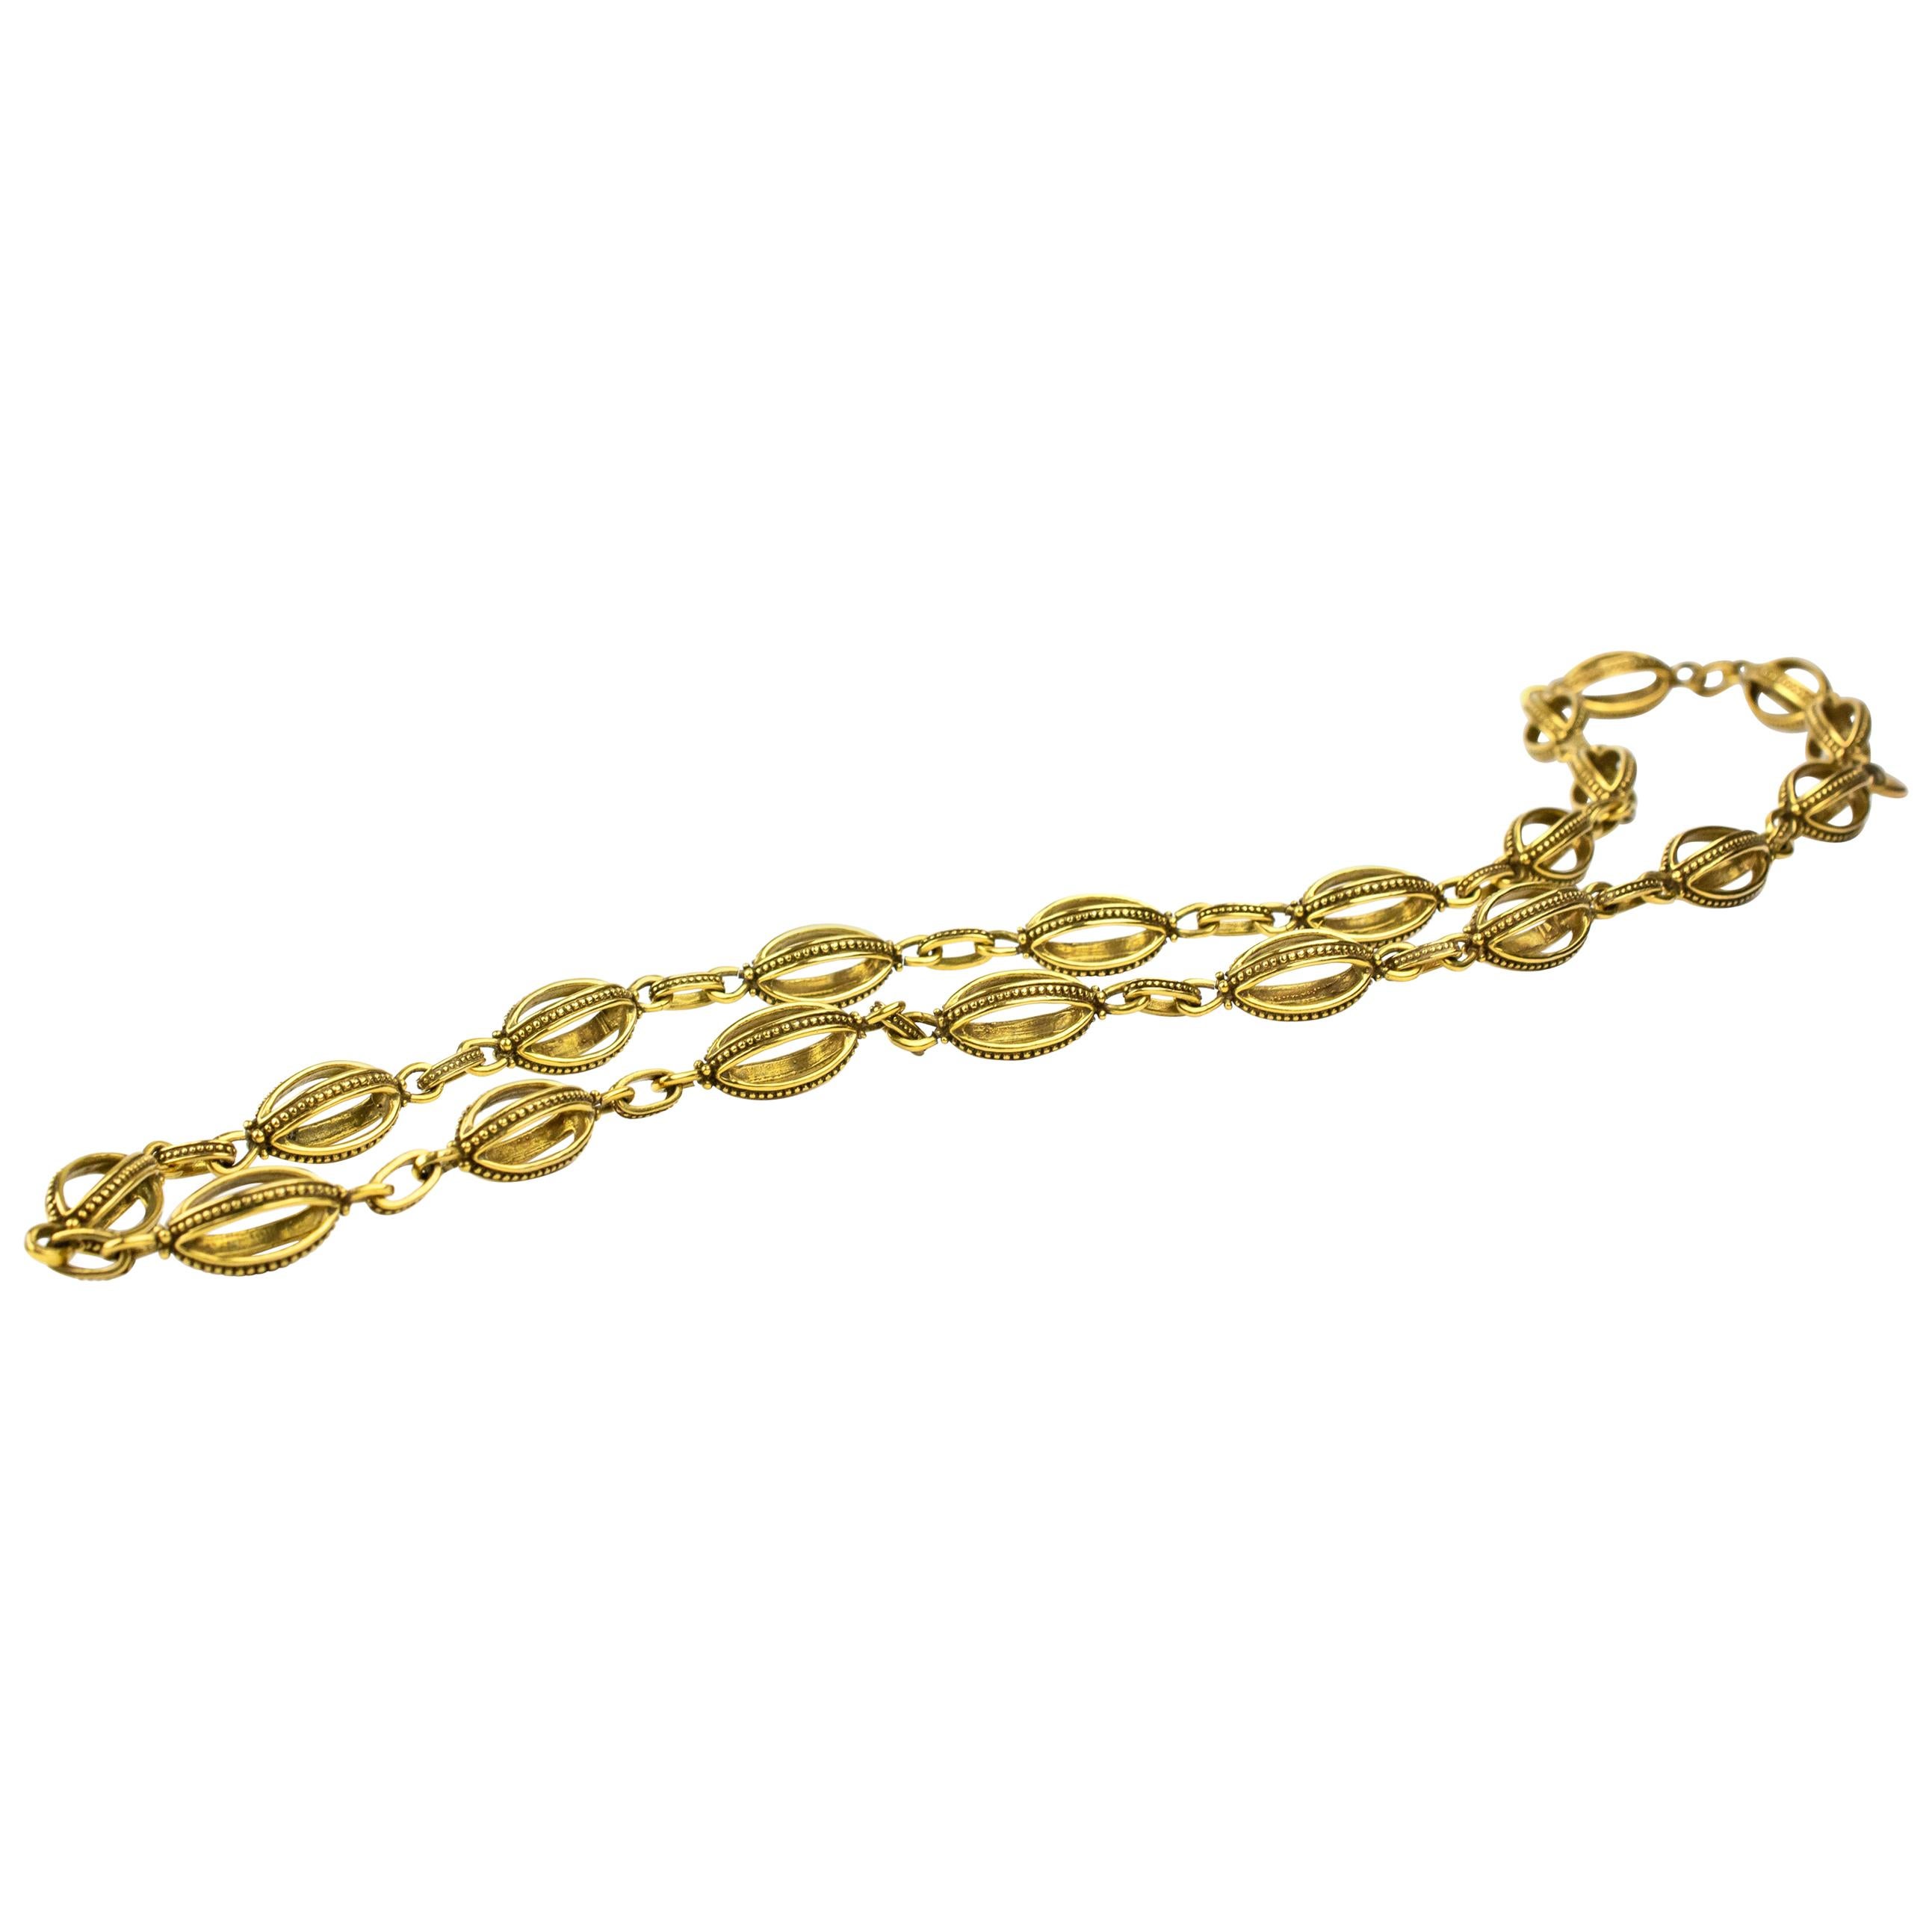 Chic Parisian chain recalling the French 